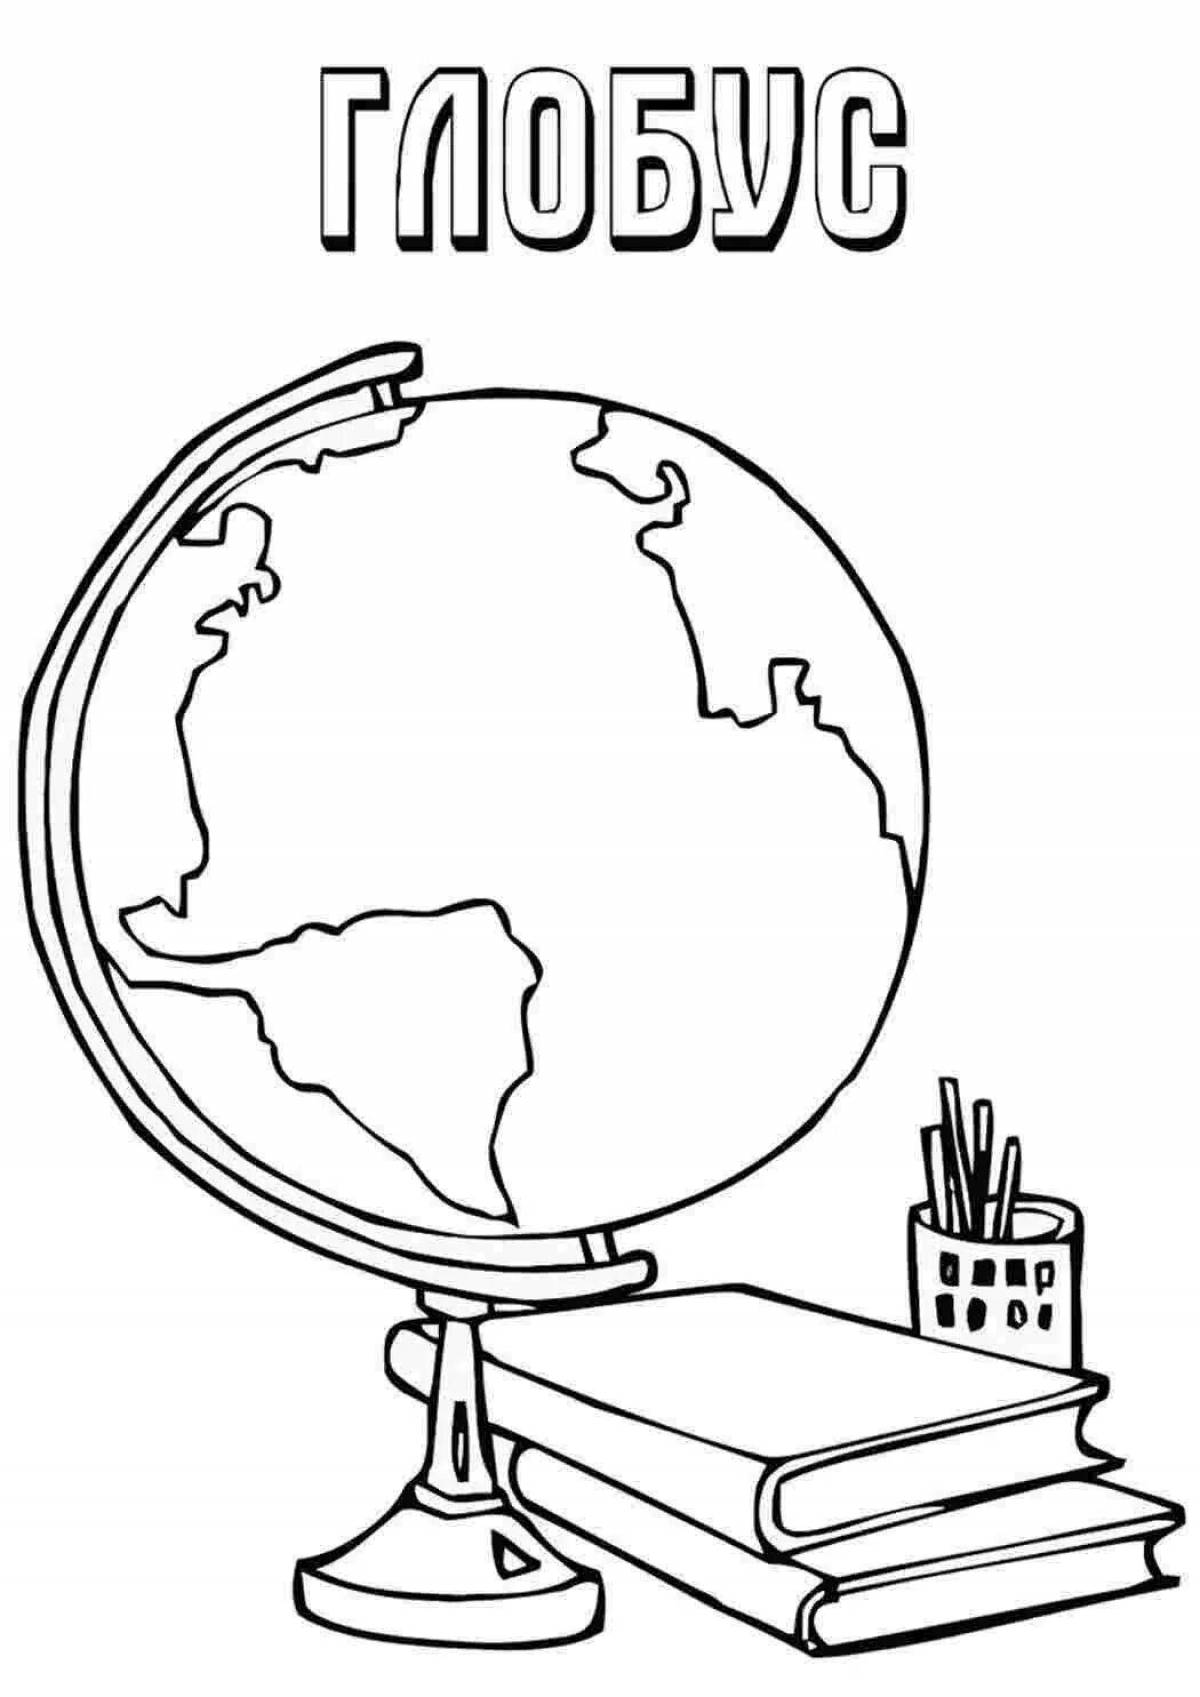 Colorful school supplies basket coloring page